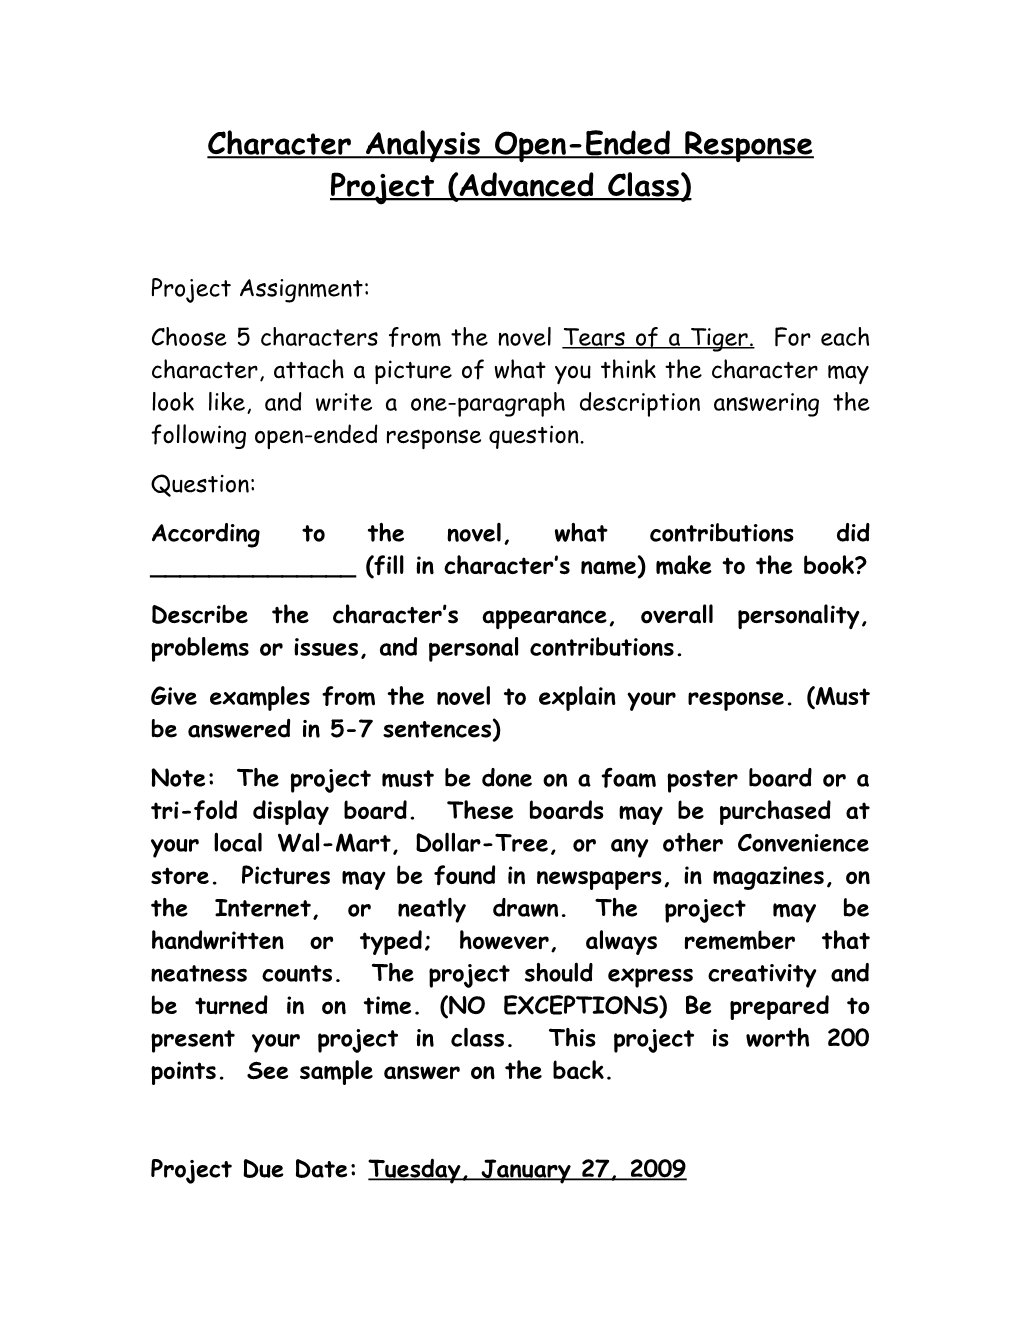 Character Analysis Open-Ended Response Project (Advanced Class)